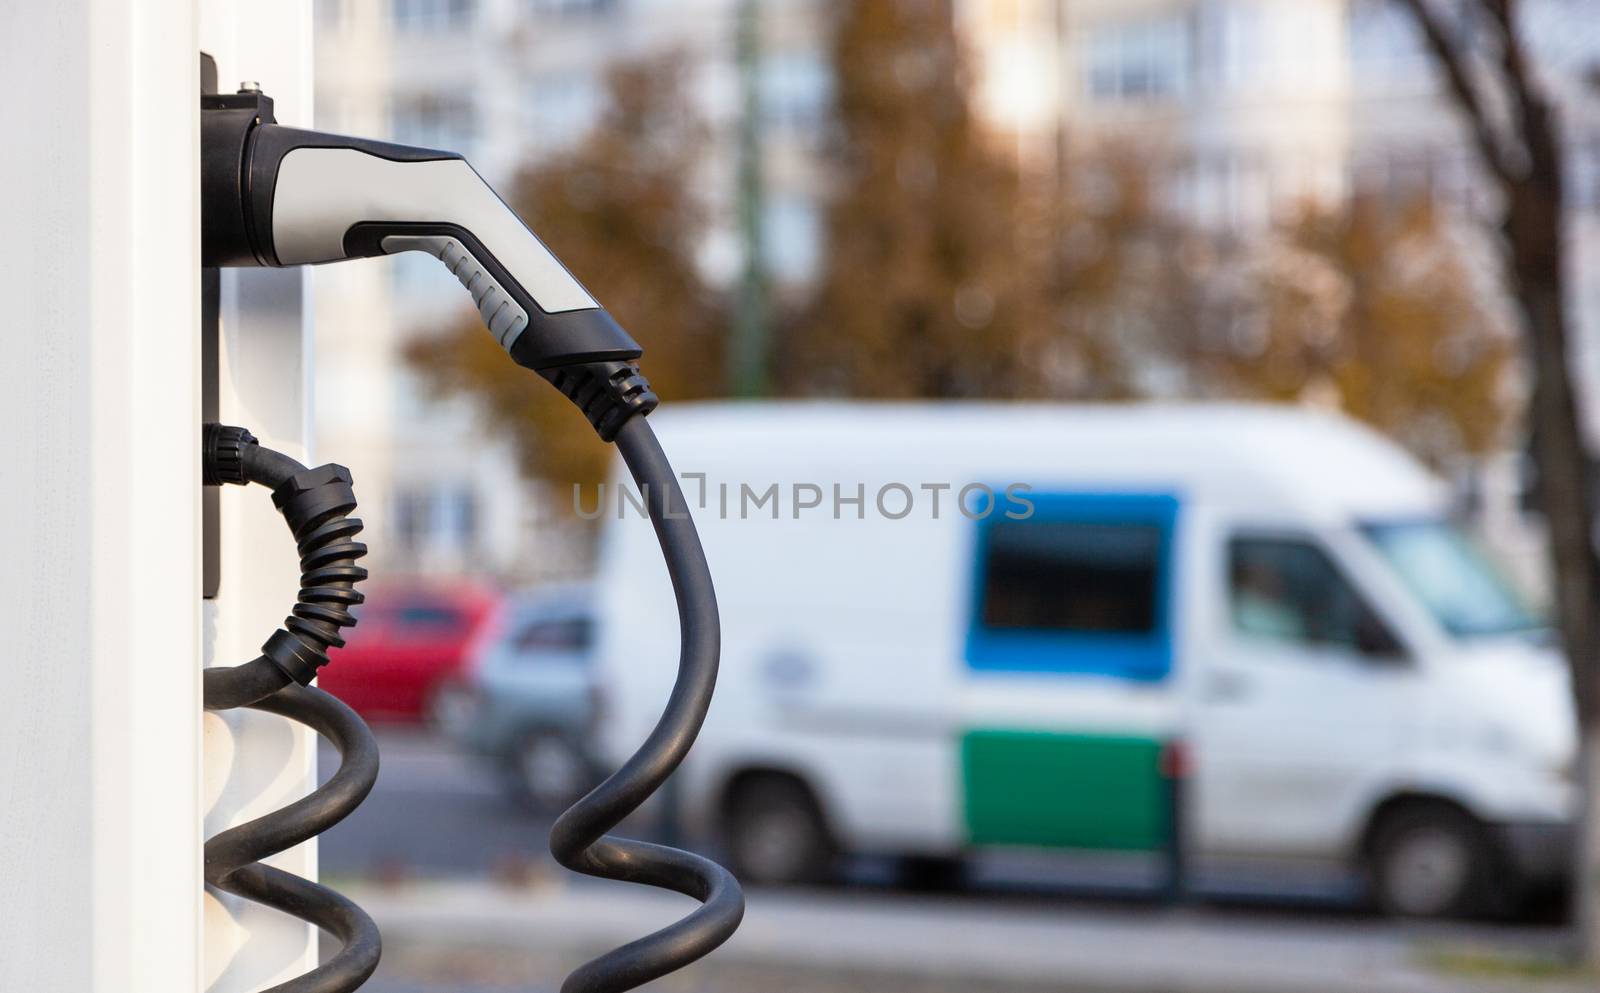 Power supply for electric car charging. Electric car charging station. Blurred concept